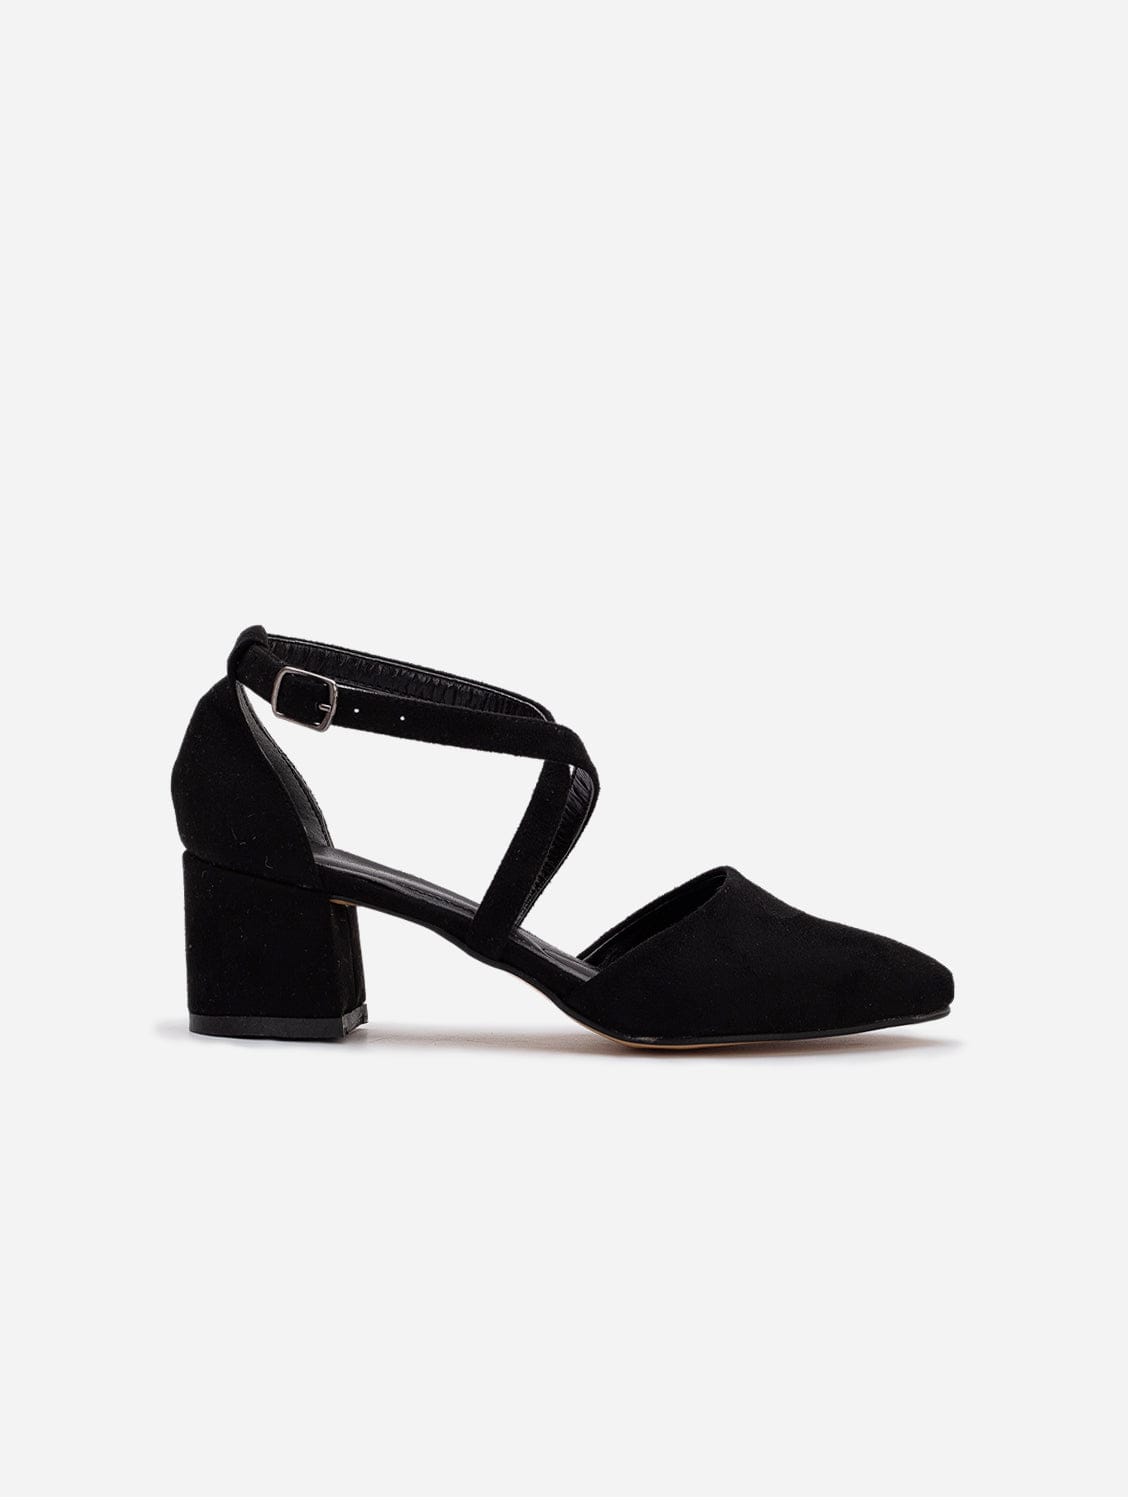 Prologue Shoes Dolly - Black Suede Heels